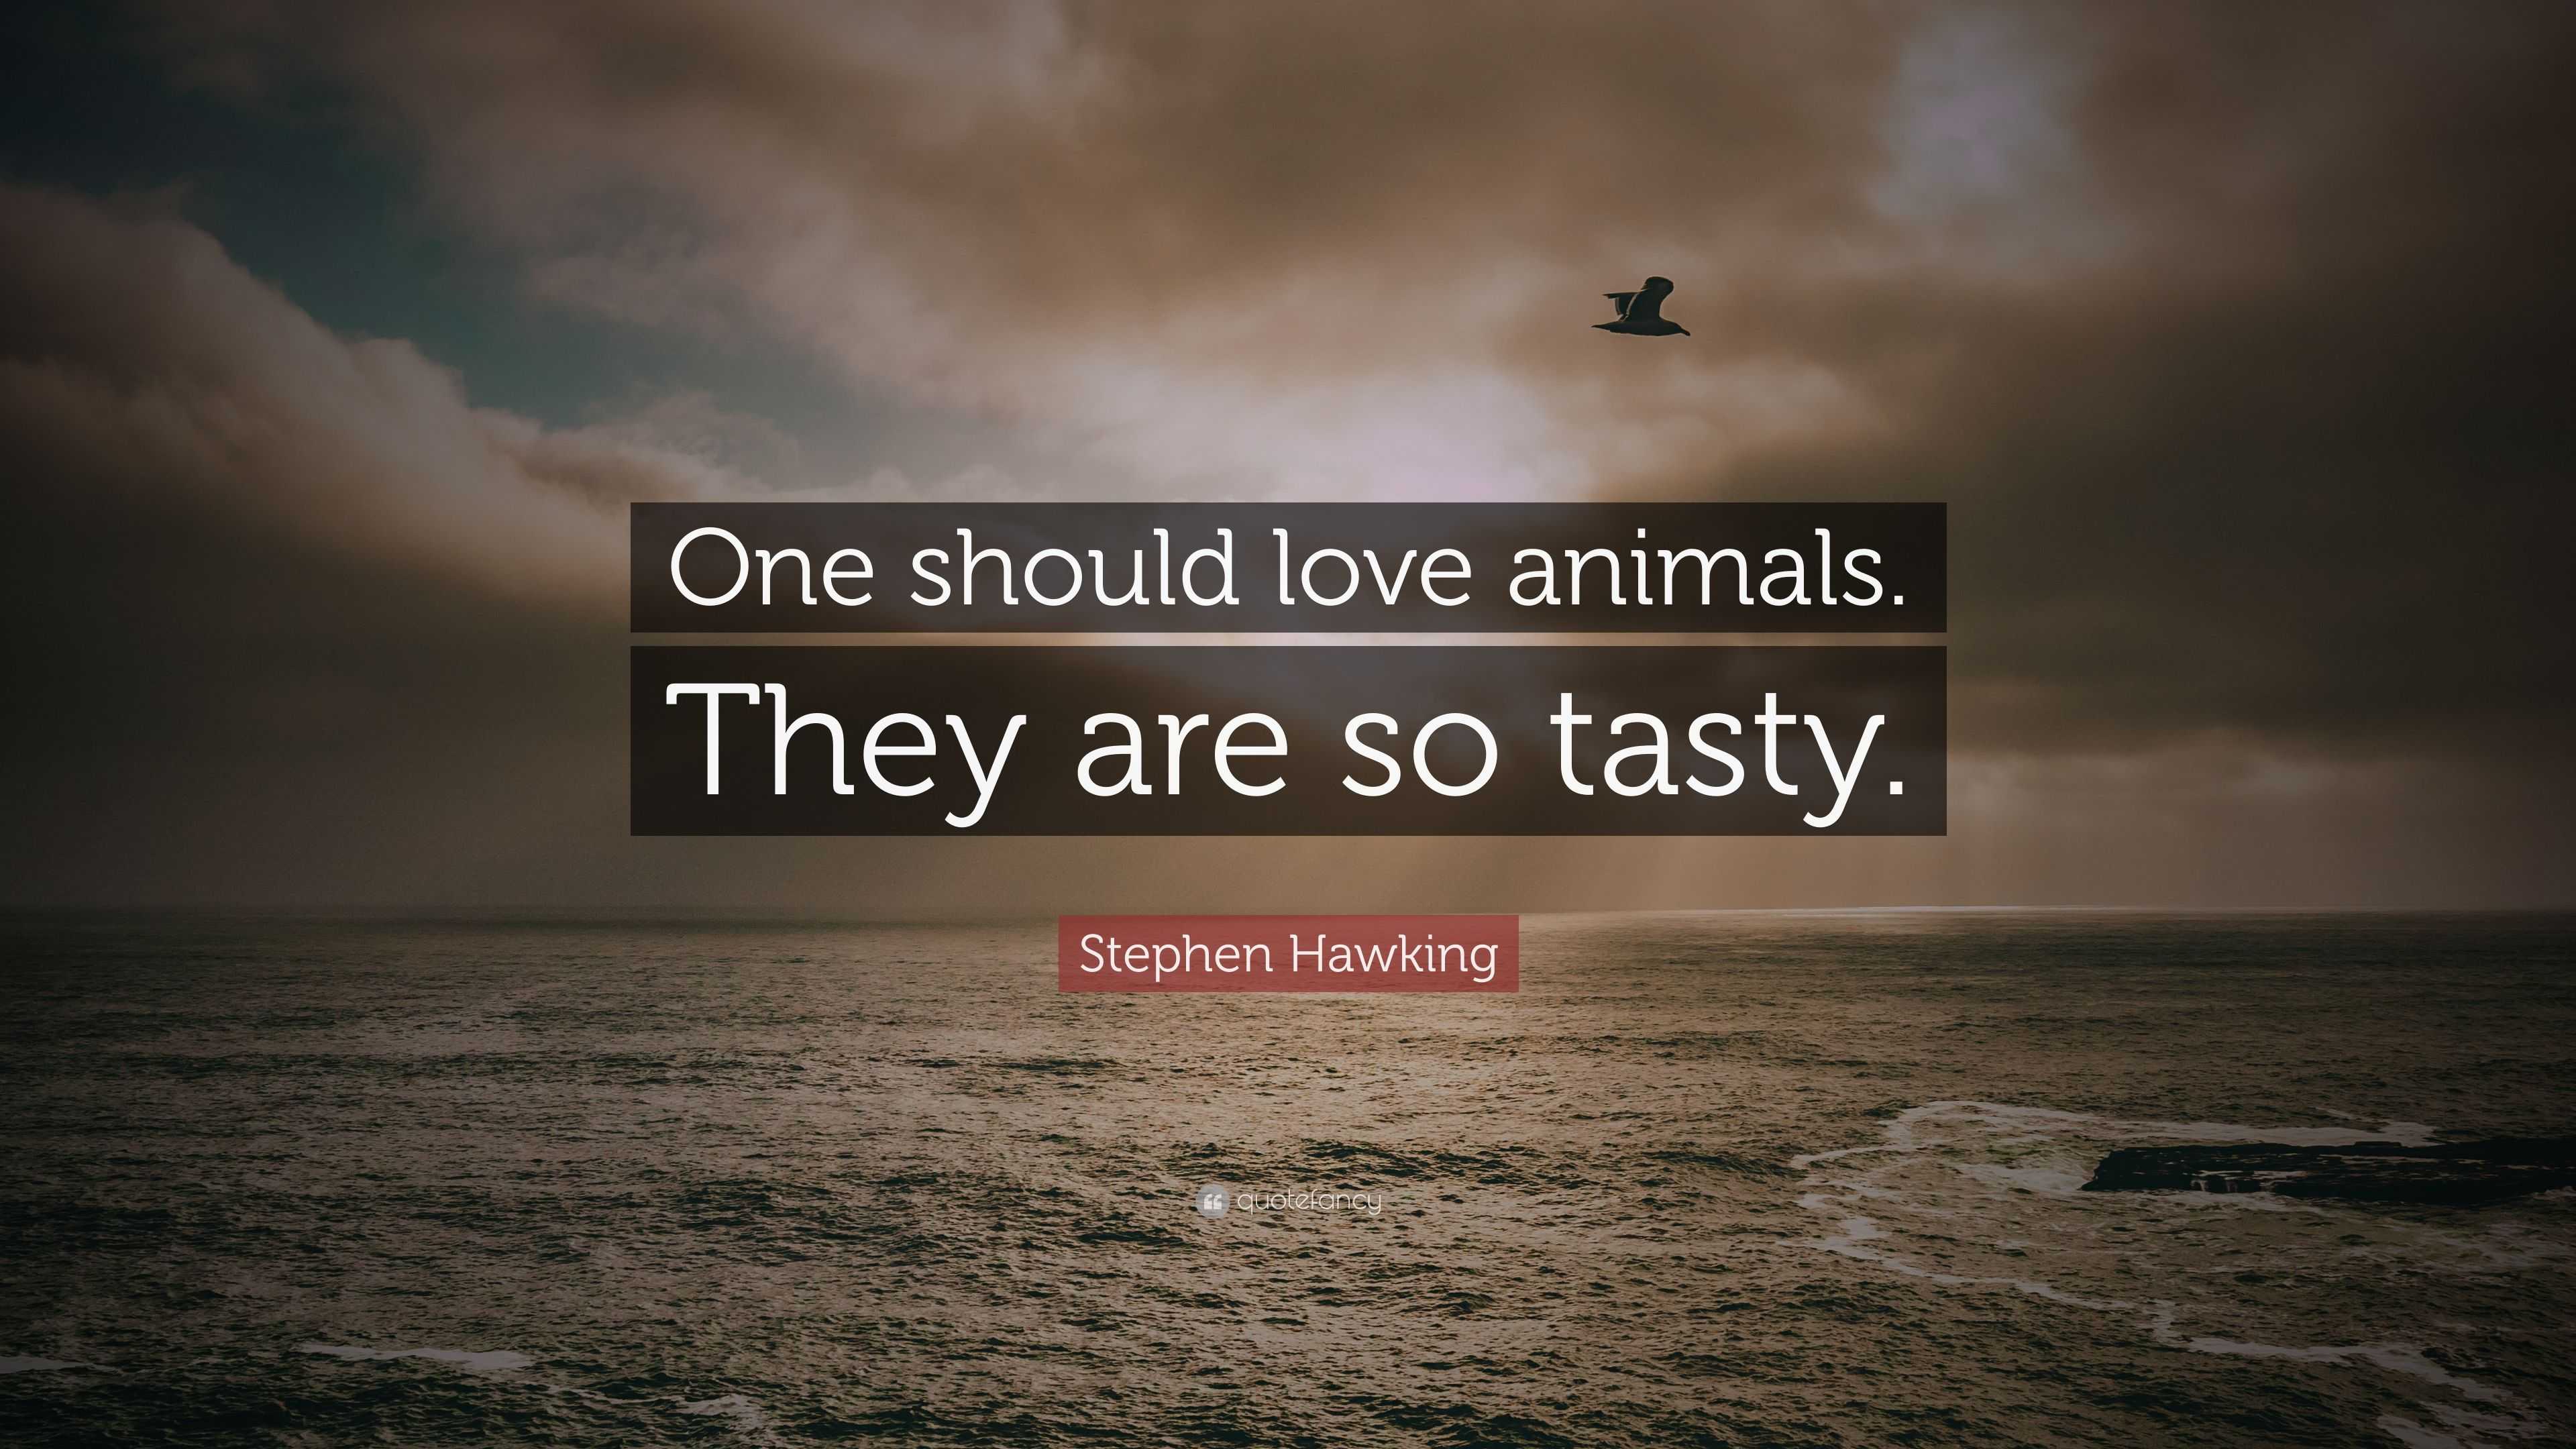 Stephen Hawking Quote: “One should love animals. They are so tasty.”